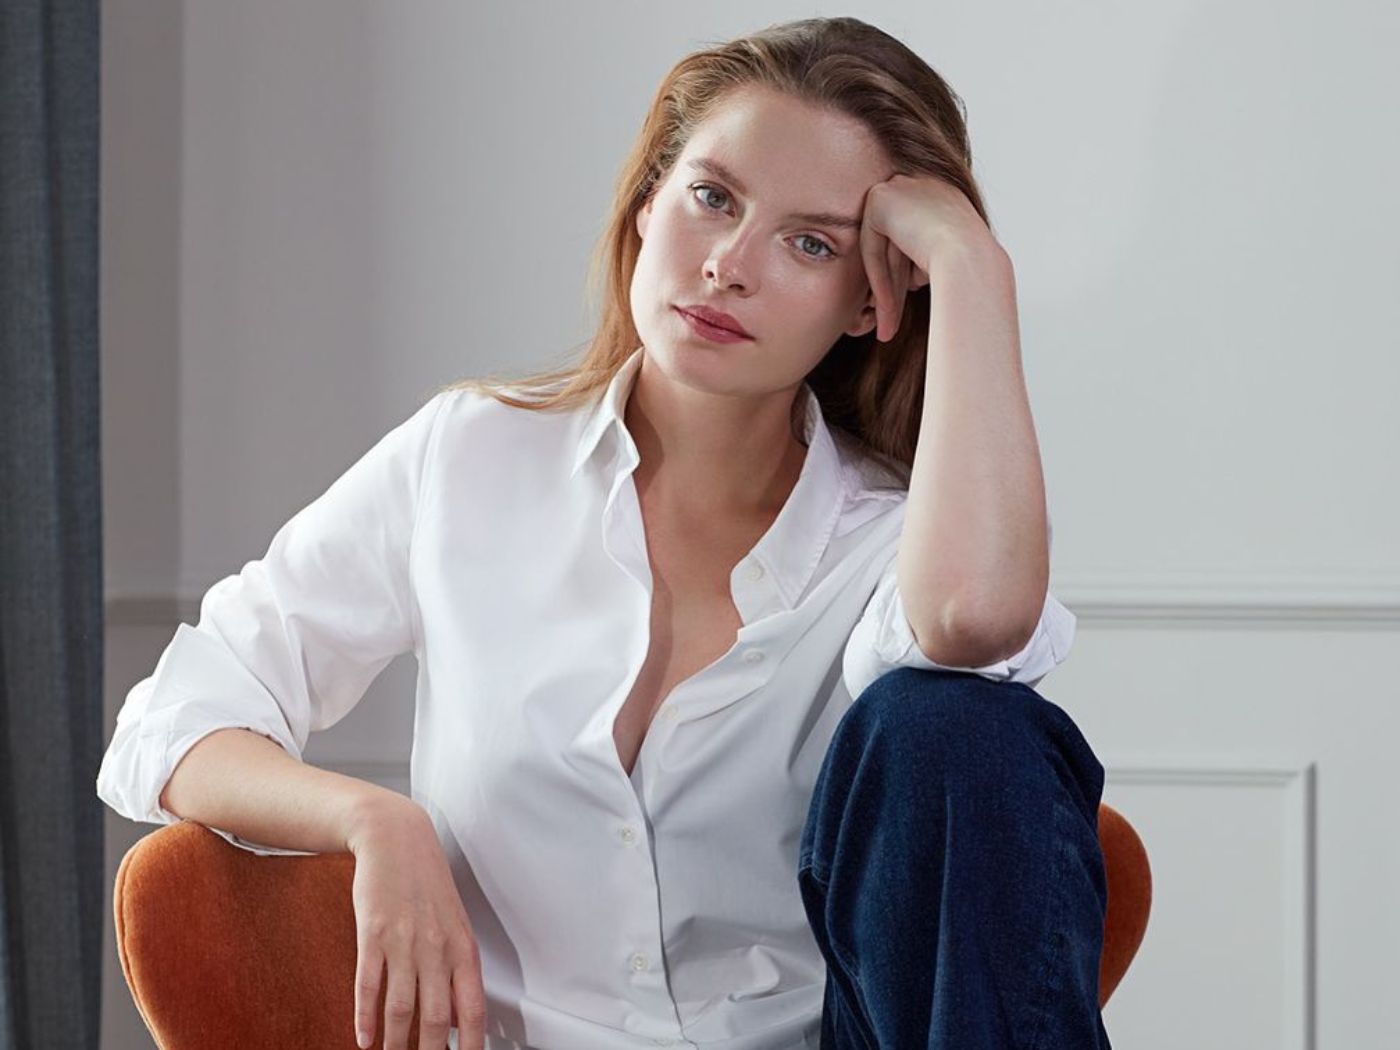 Woman seated in chair wearing a white shirt and jeans.